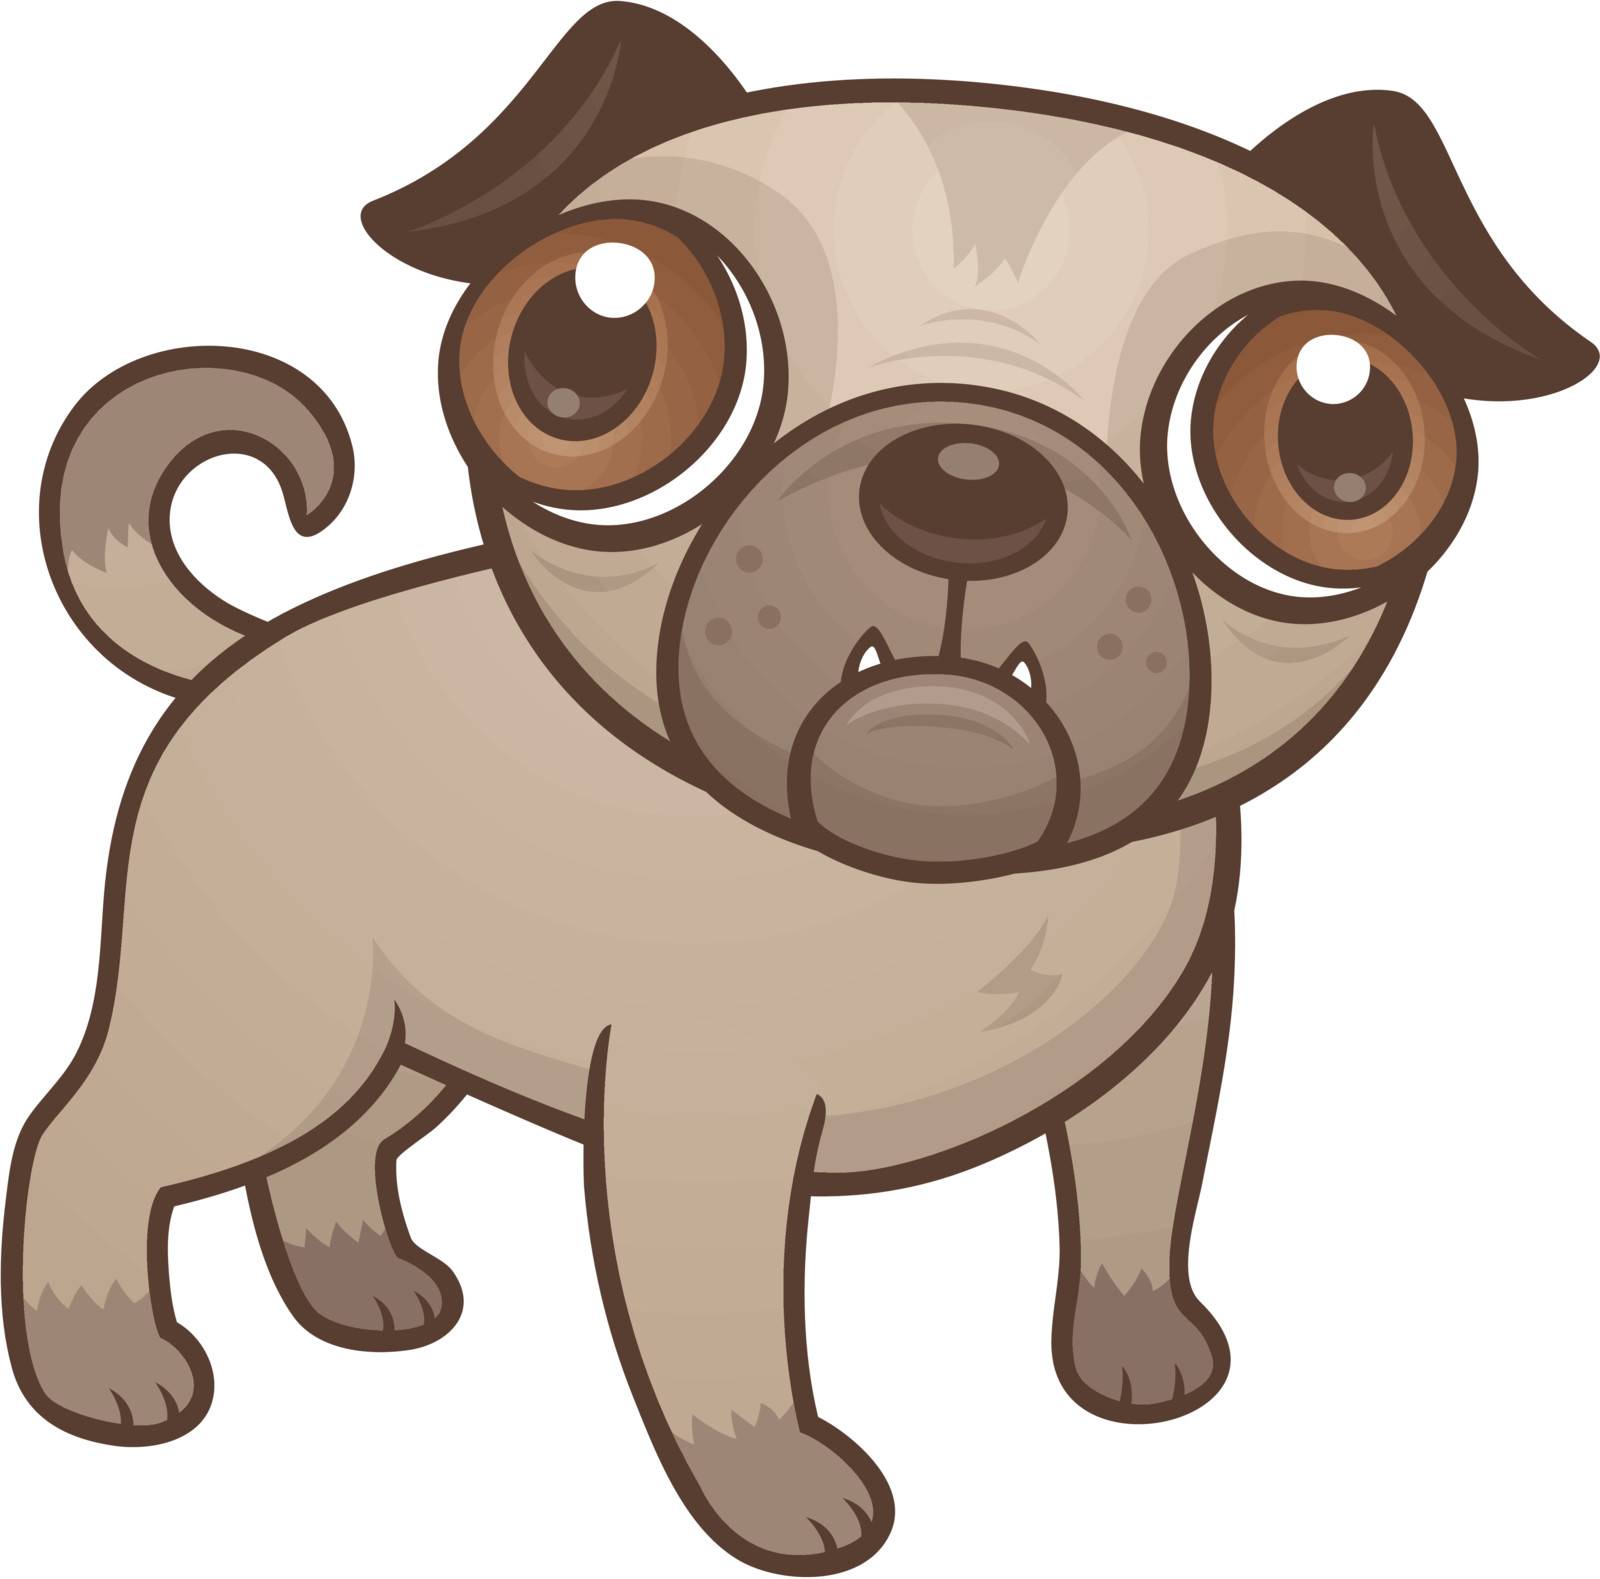 Vector cartoon illustration of a cute Pug puppy dog with really big brown eyes.